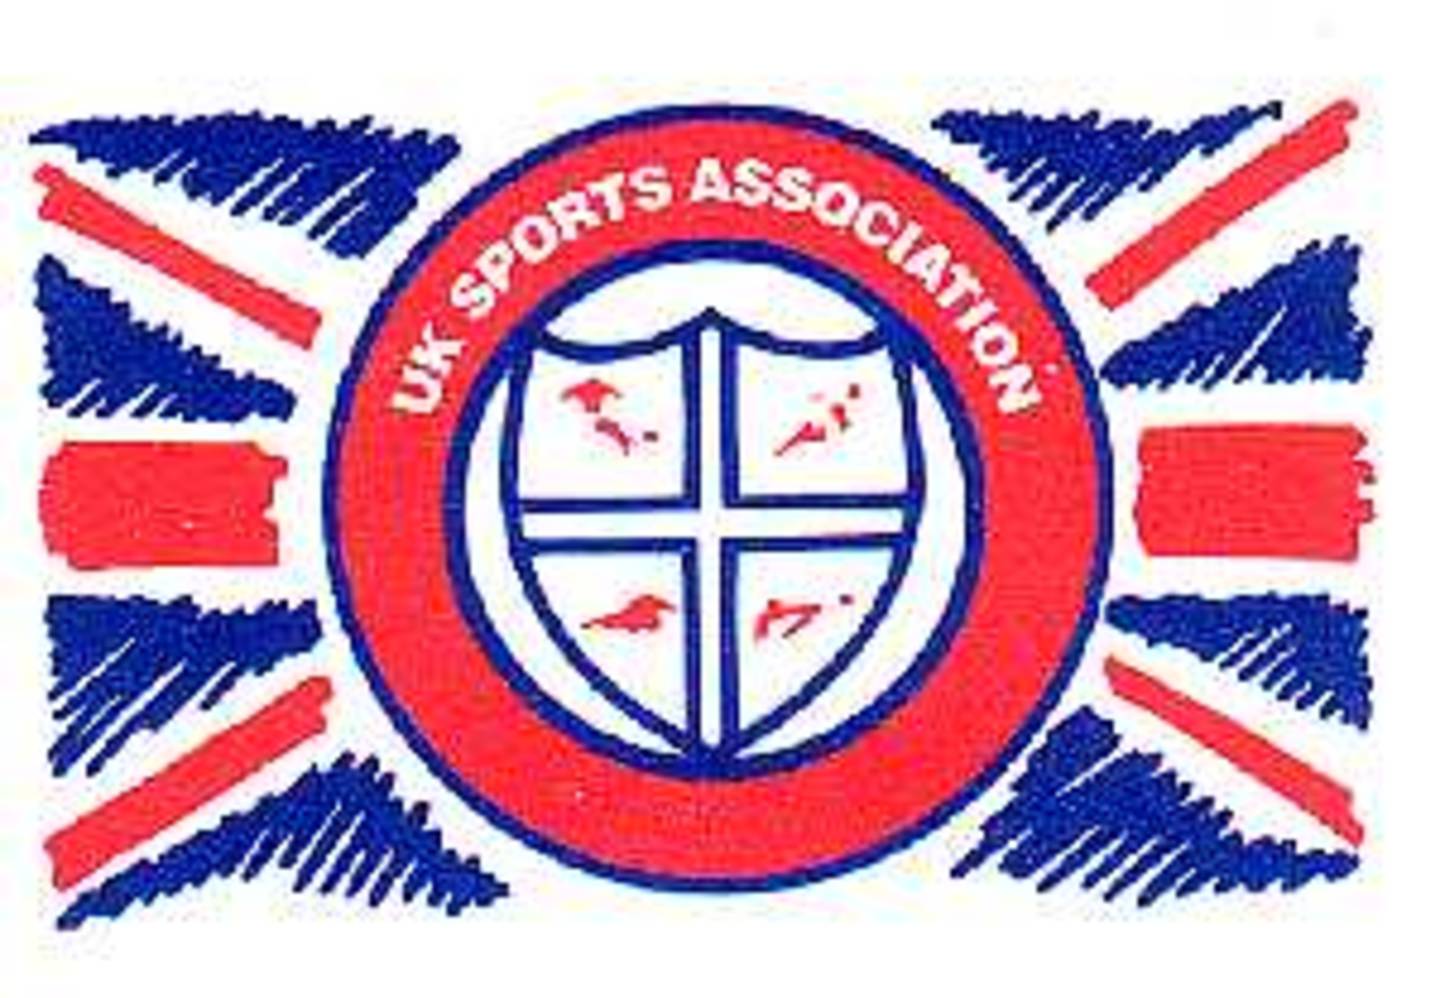 UK Sports Association for People with Learning Disability (UKSA)